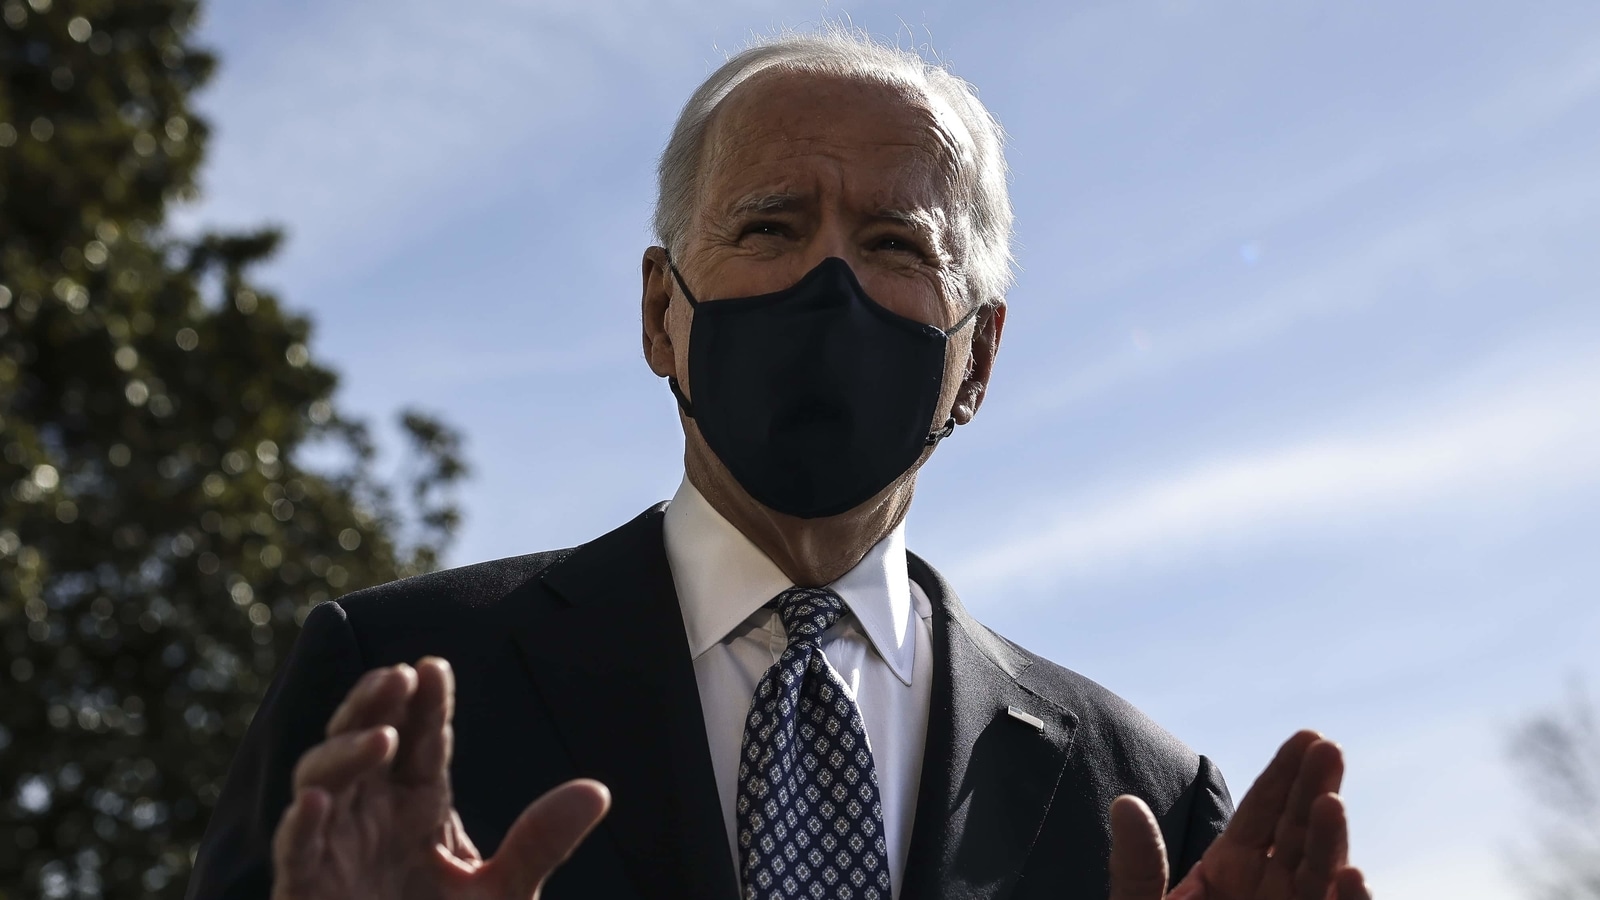 ‘Blunt’ Joe Biden says US facing issues with racism, xenophobia and nativism